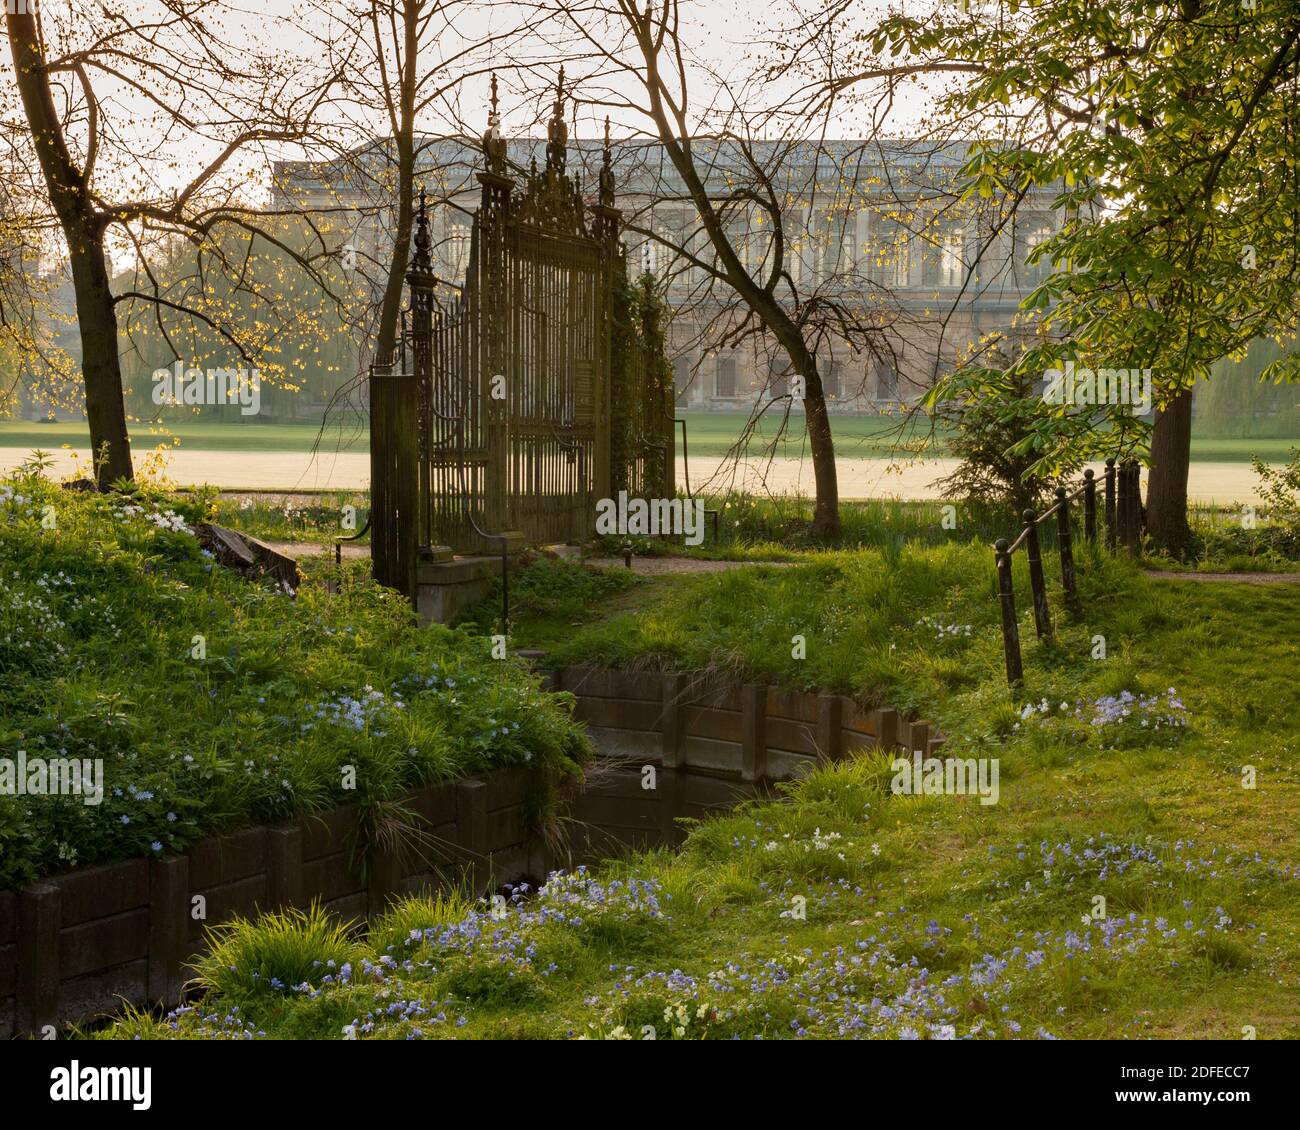 CAMBRIDGE, UK - APRIL 24, 2010:  Misty morning with old iron gates and Trinity College in the background Stock Photo